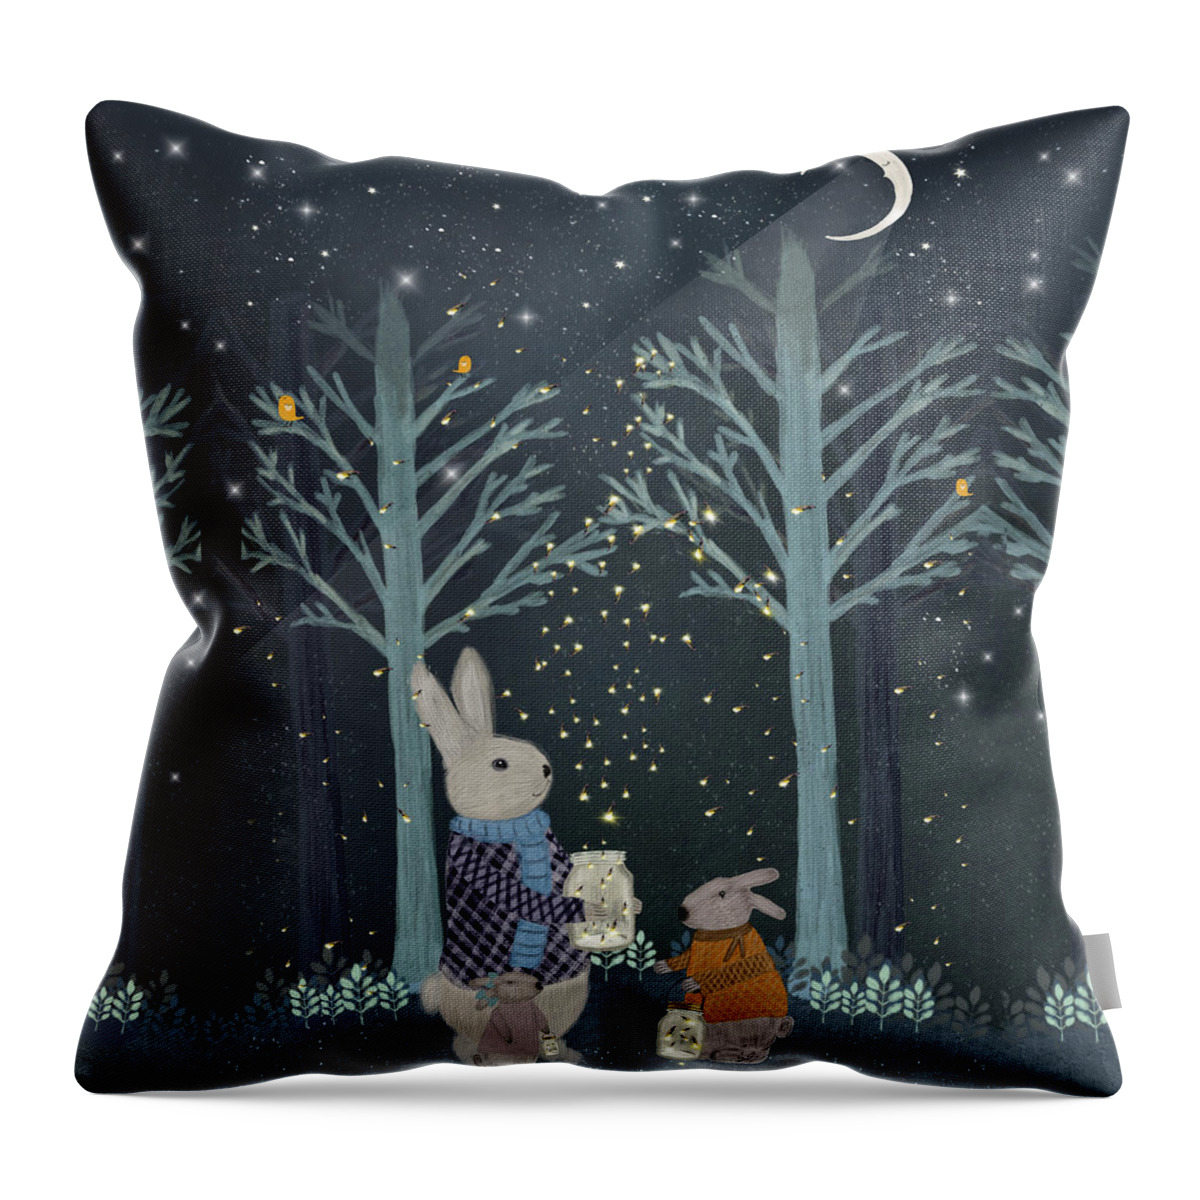 Nursery Art Throw Pillow featuring the painting Catching Fireflies by Bri Buckley